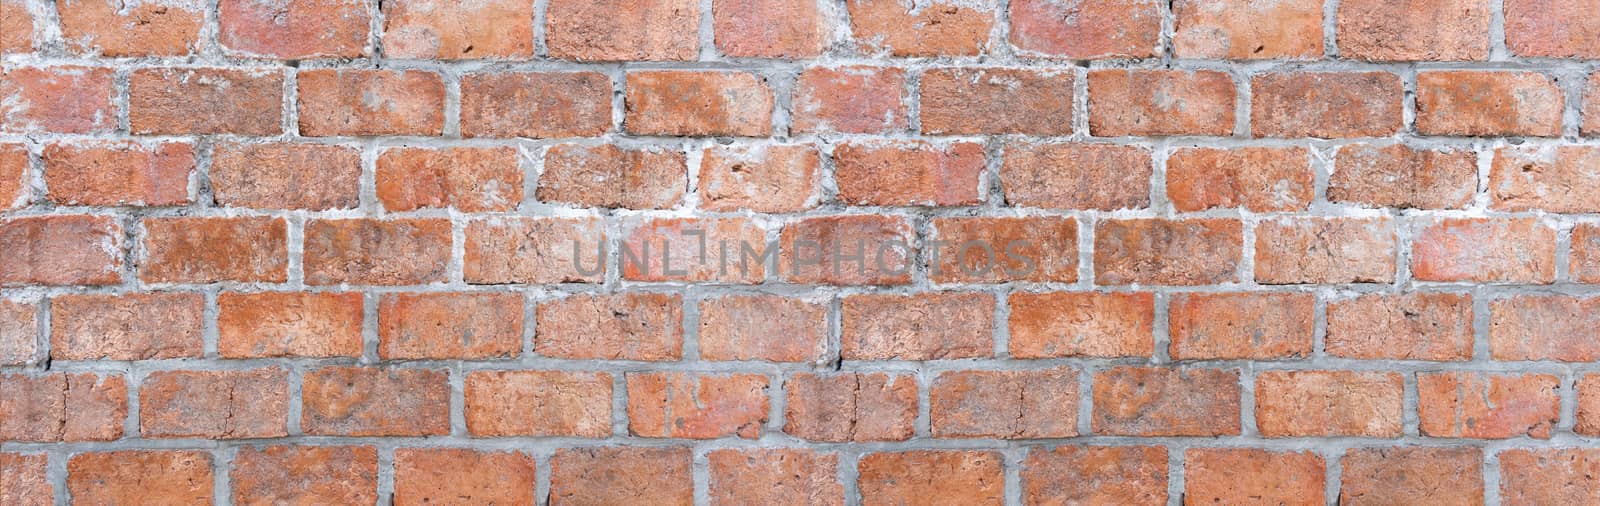 Abstract red brick wall texture light gray old stucco and vintag by golfmhee